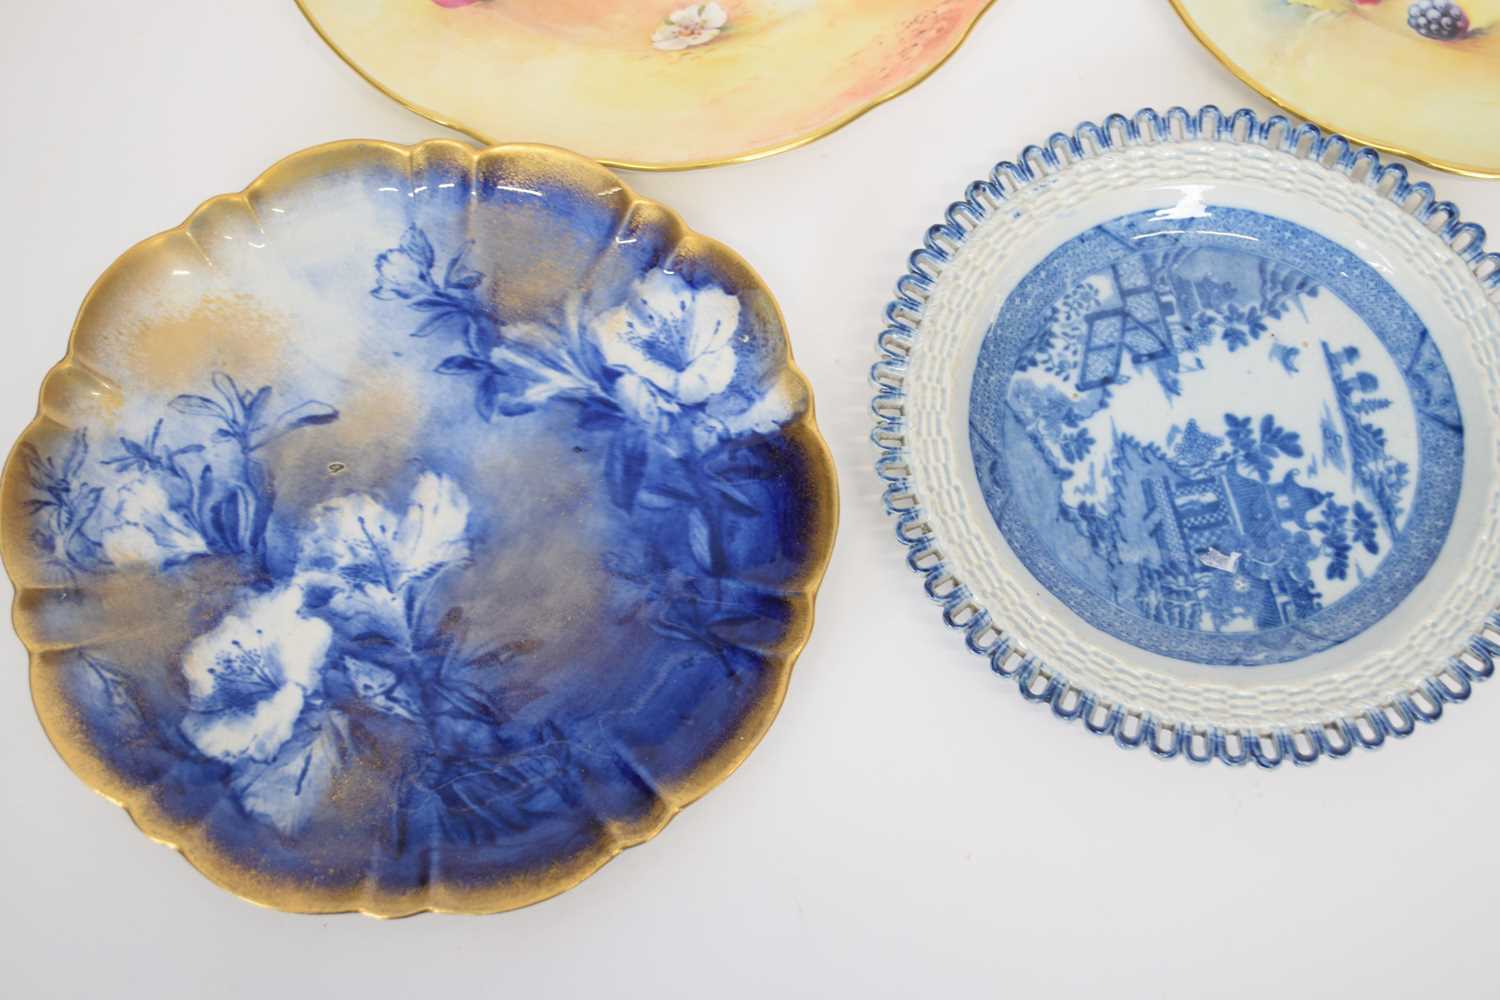 Small pearlware plate with pierced border, possibly Davenport, together with a George Jones plate, - Image 3 of 4